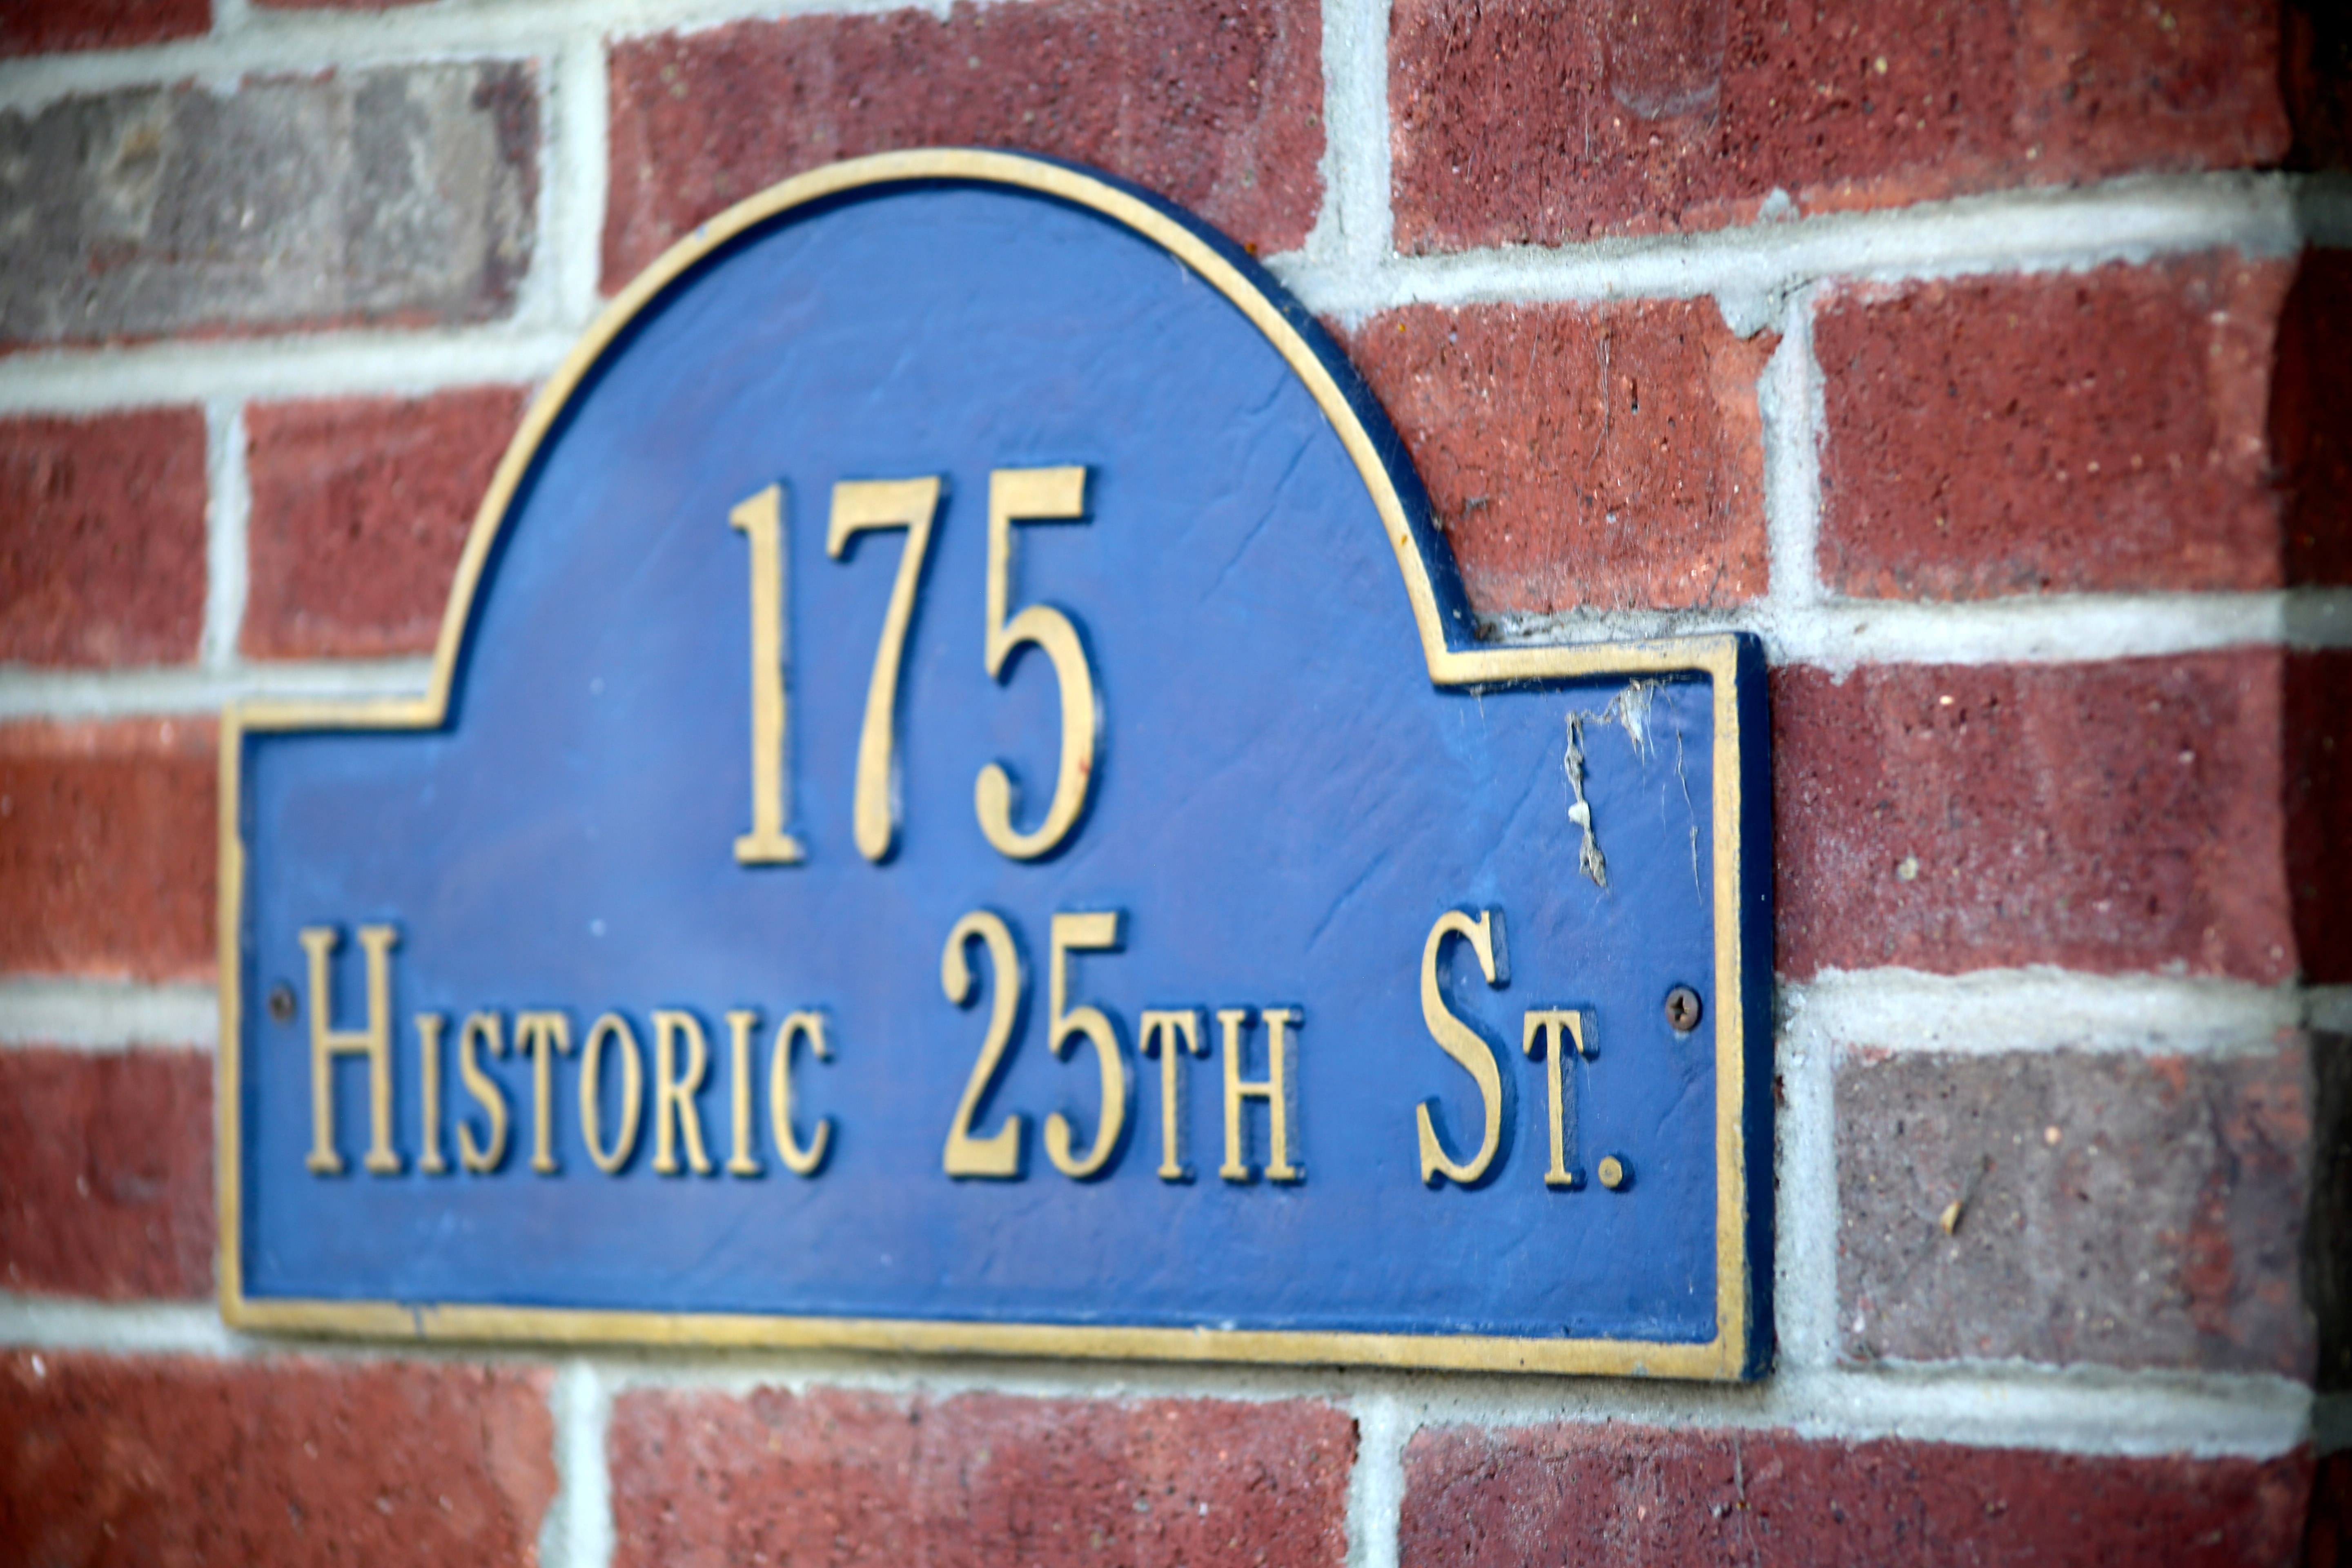 175 historic 25th st. signboard